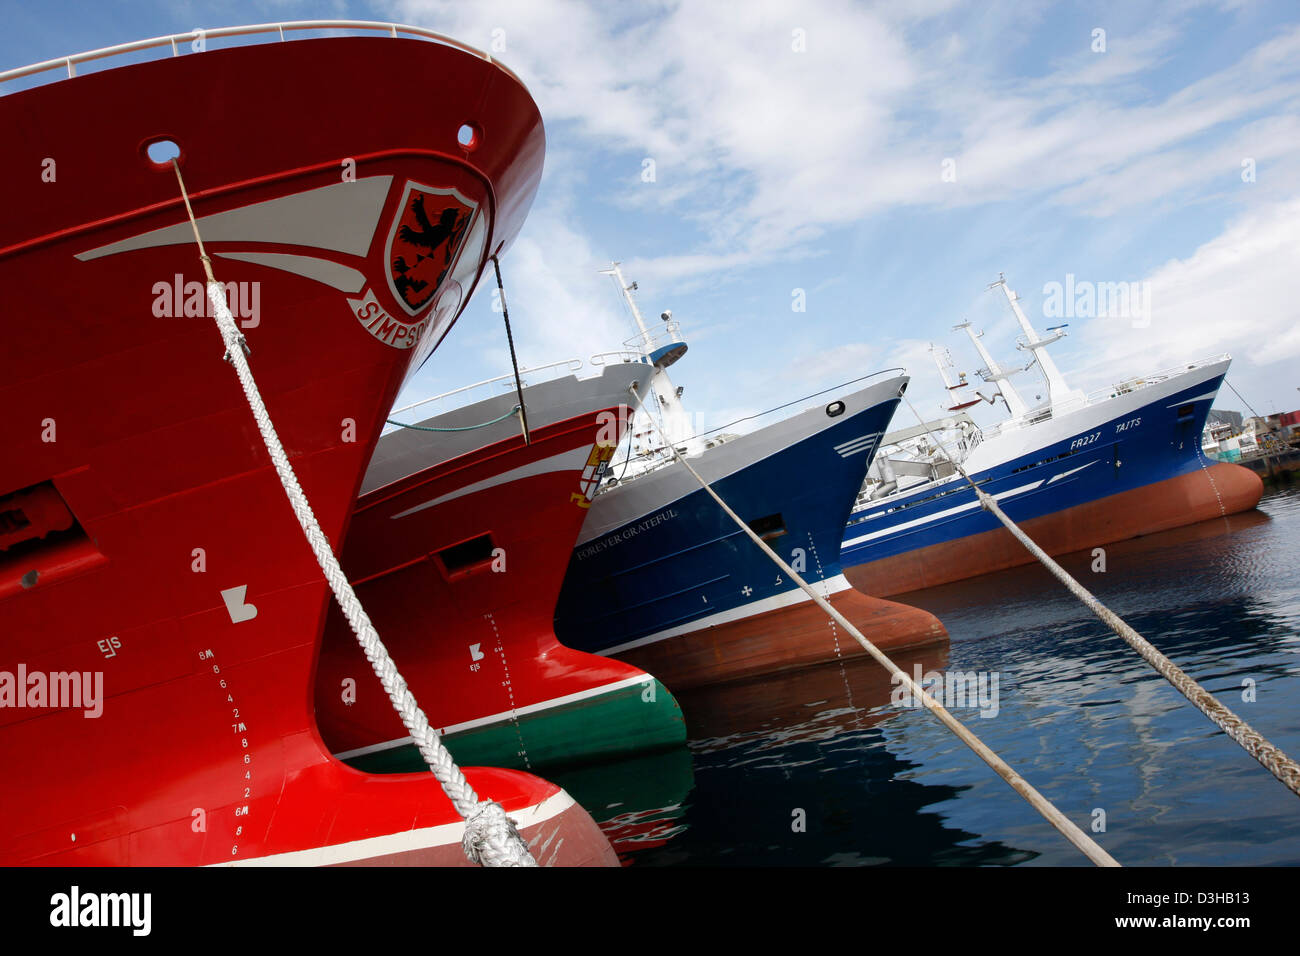 Large fishing boats moored in Fraserburgh Harbour on the North East coast of Scotland Stock Photo